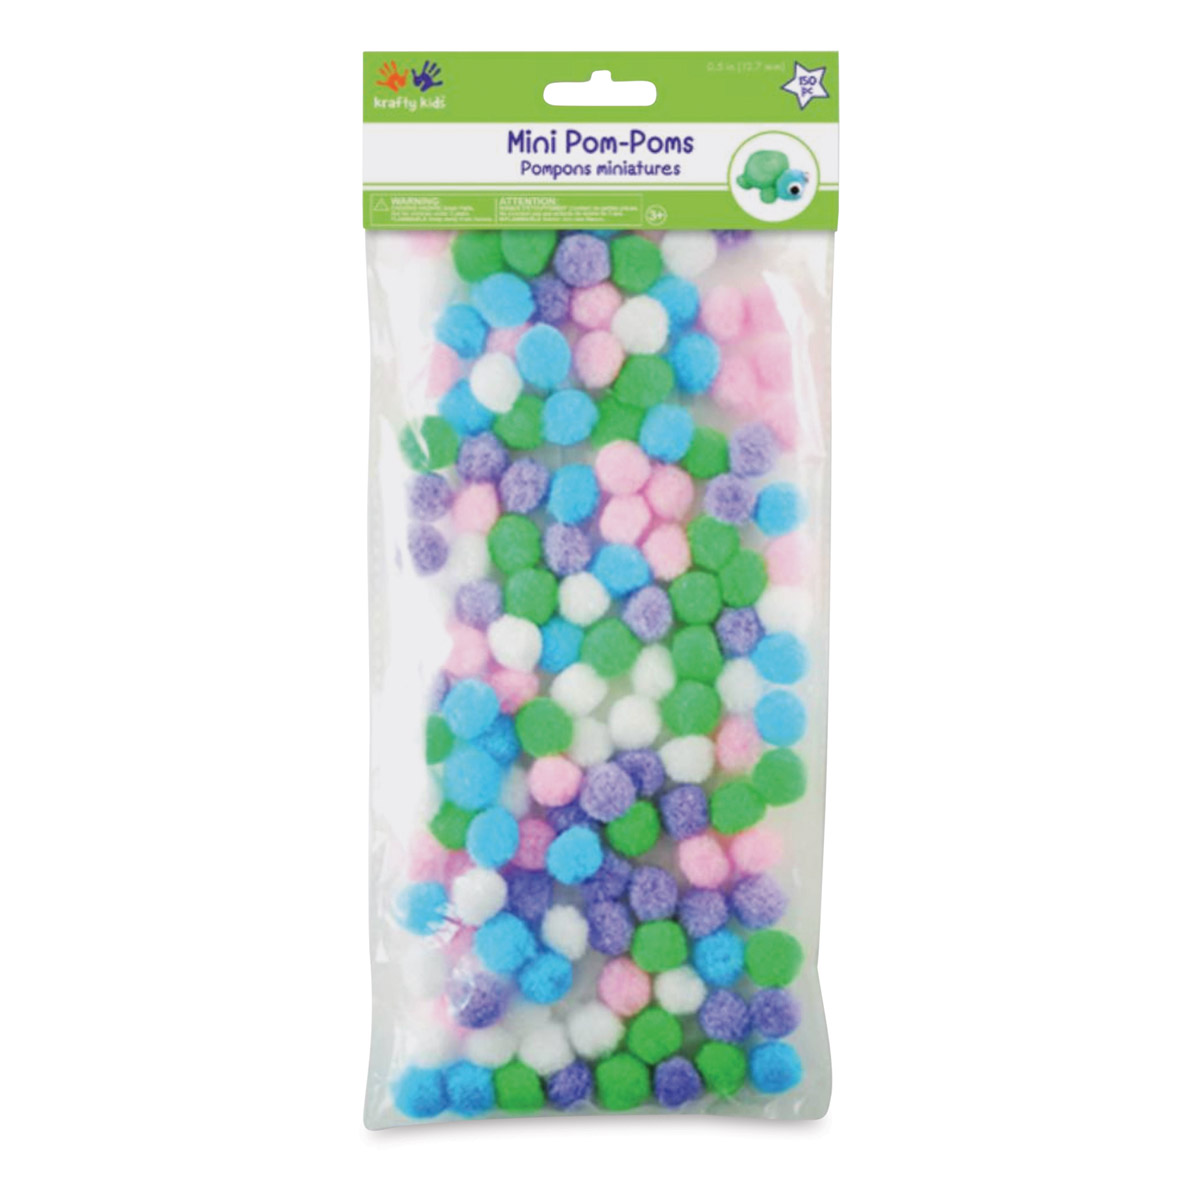 Pastel Self-Adhesive Glitter Pom Poms (Pack of 150) Craft Supplies